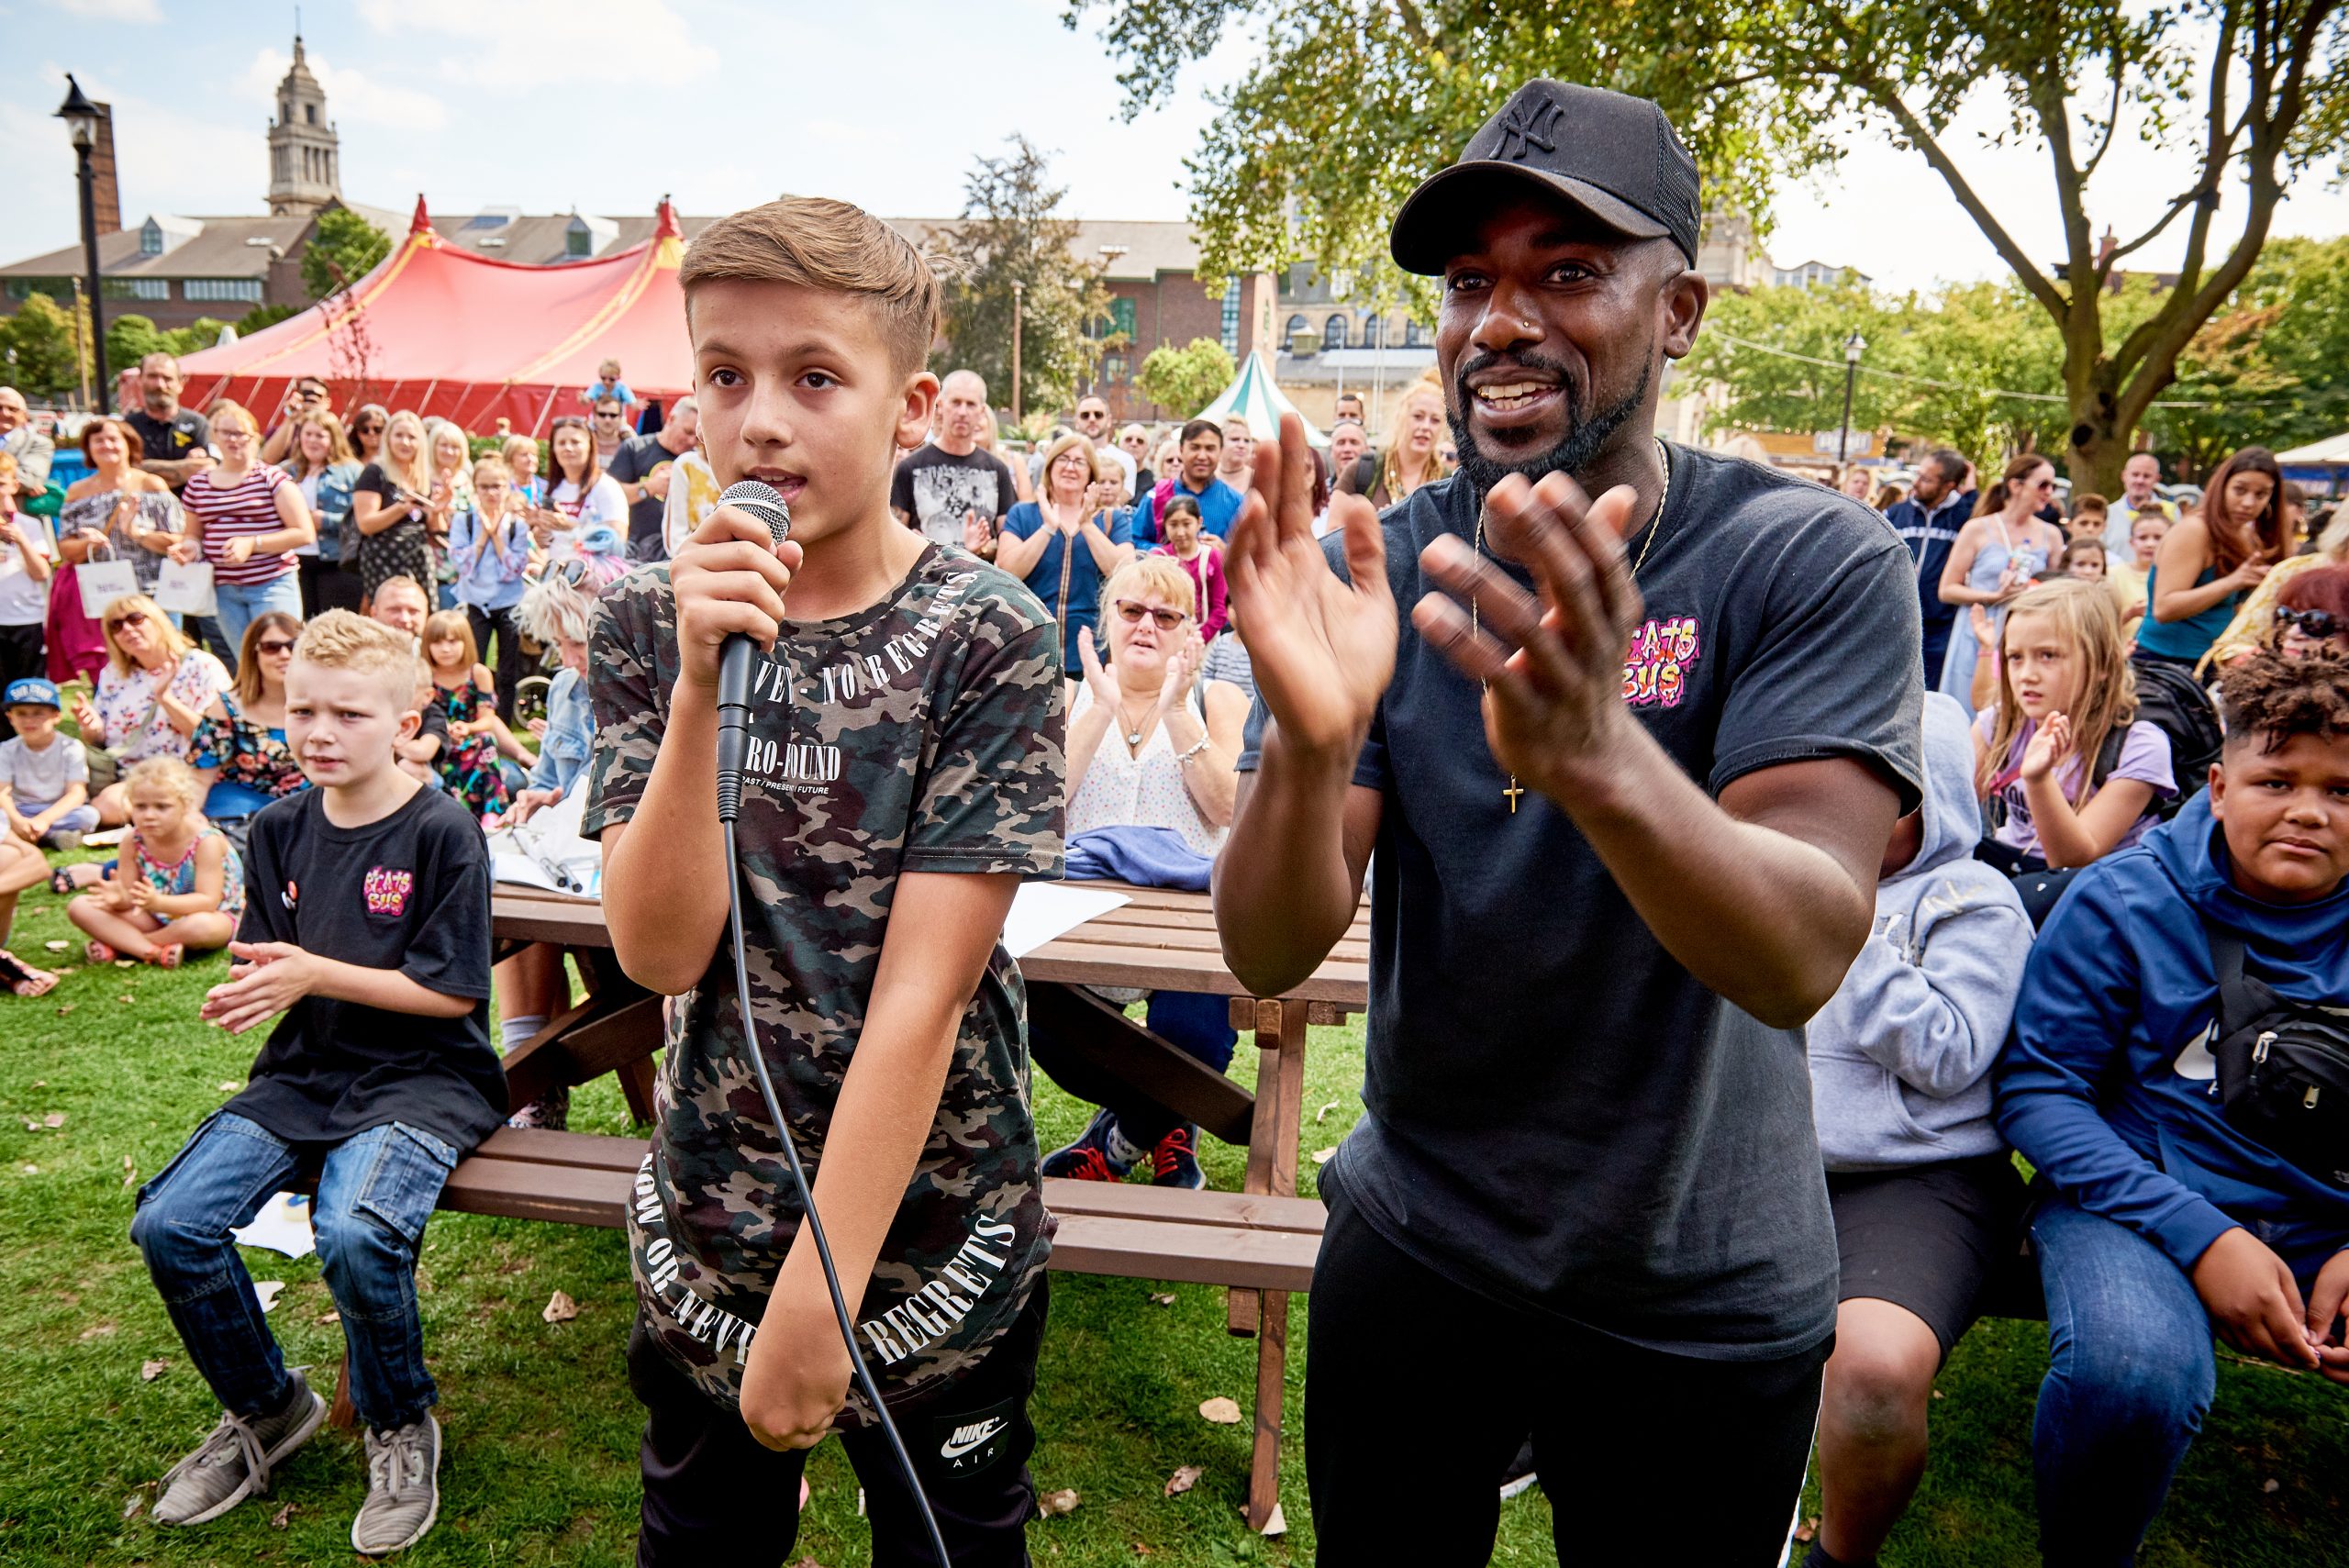 A Black man applauds a white boy on a microphone. In the background lots of children watch.